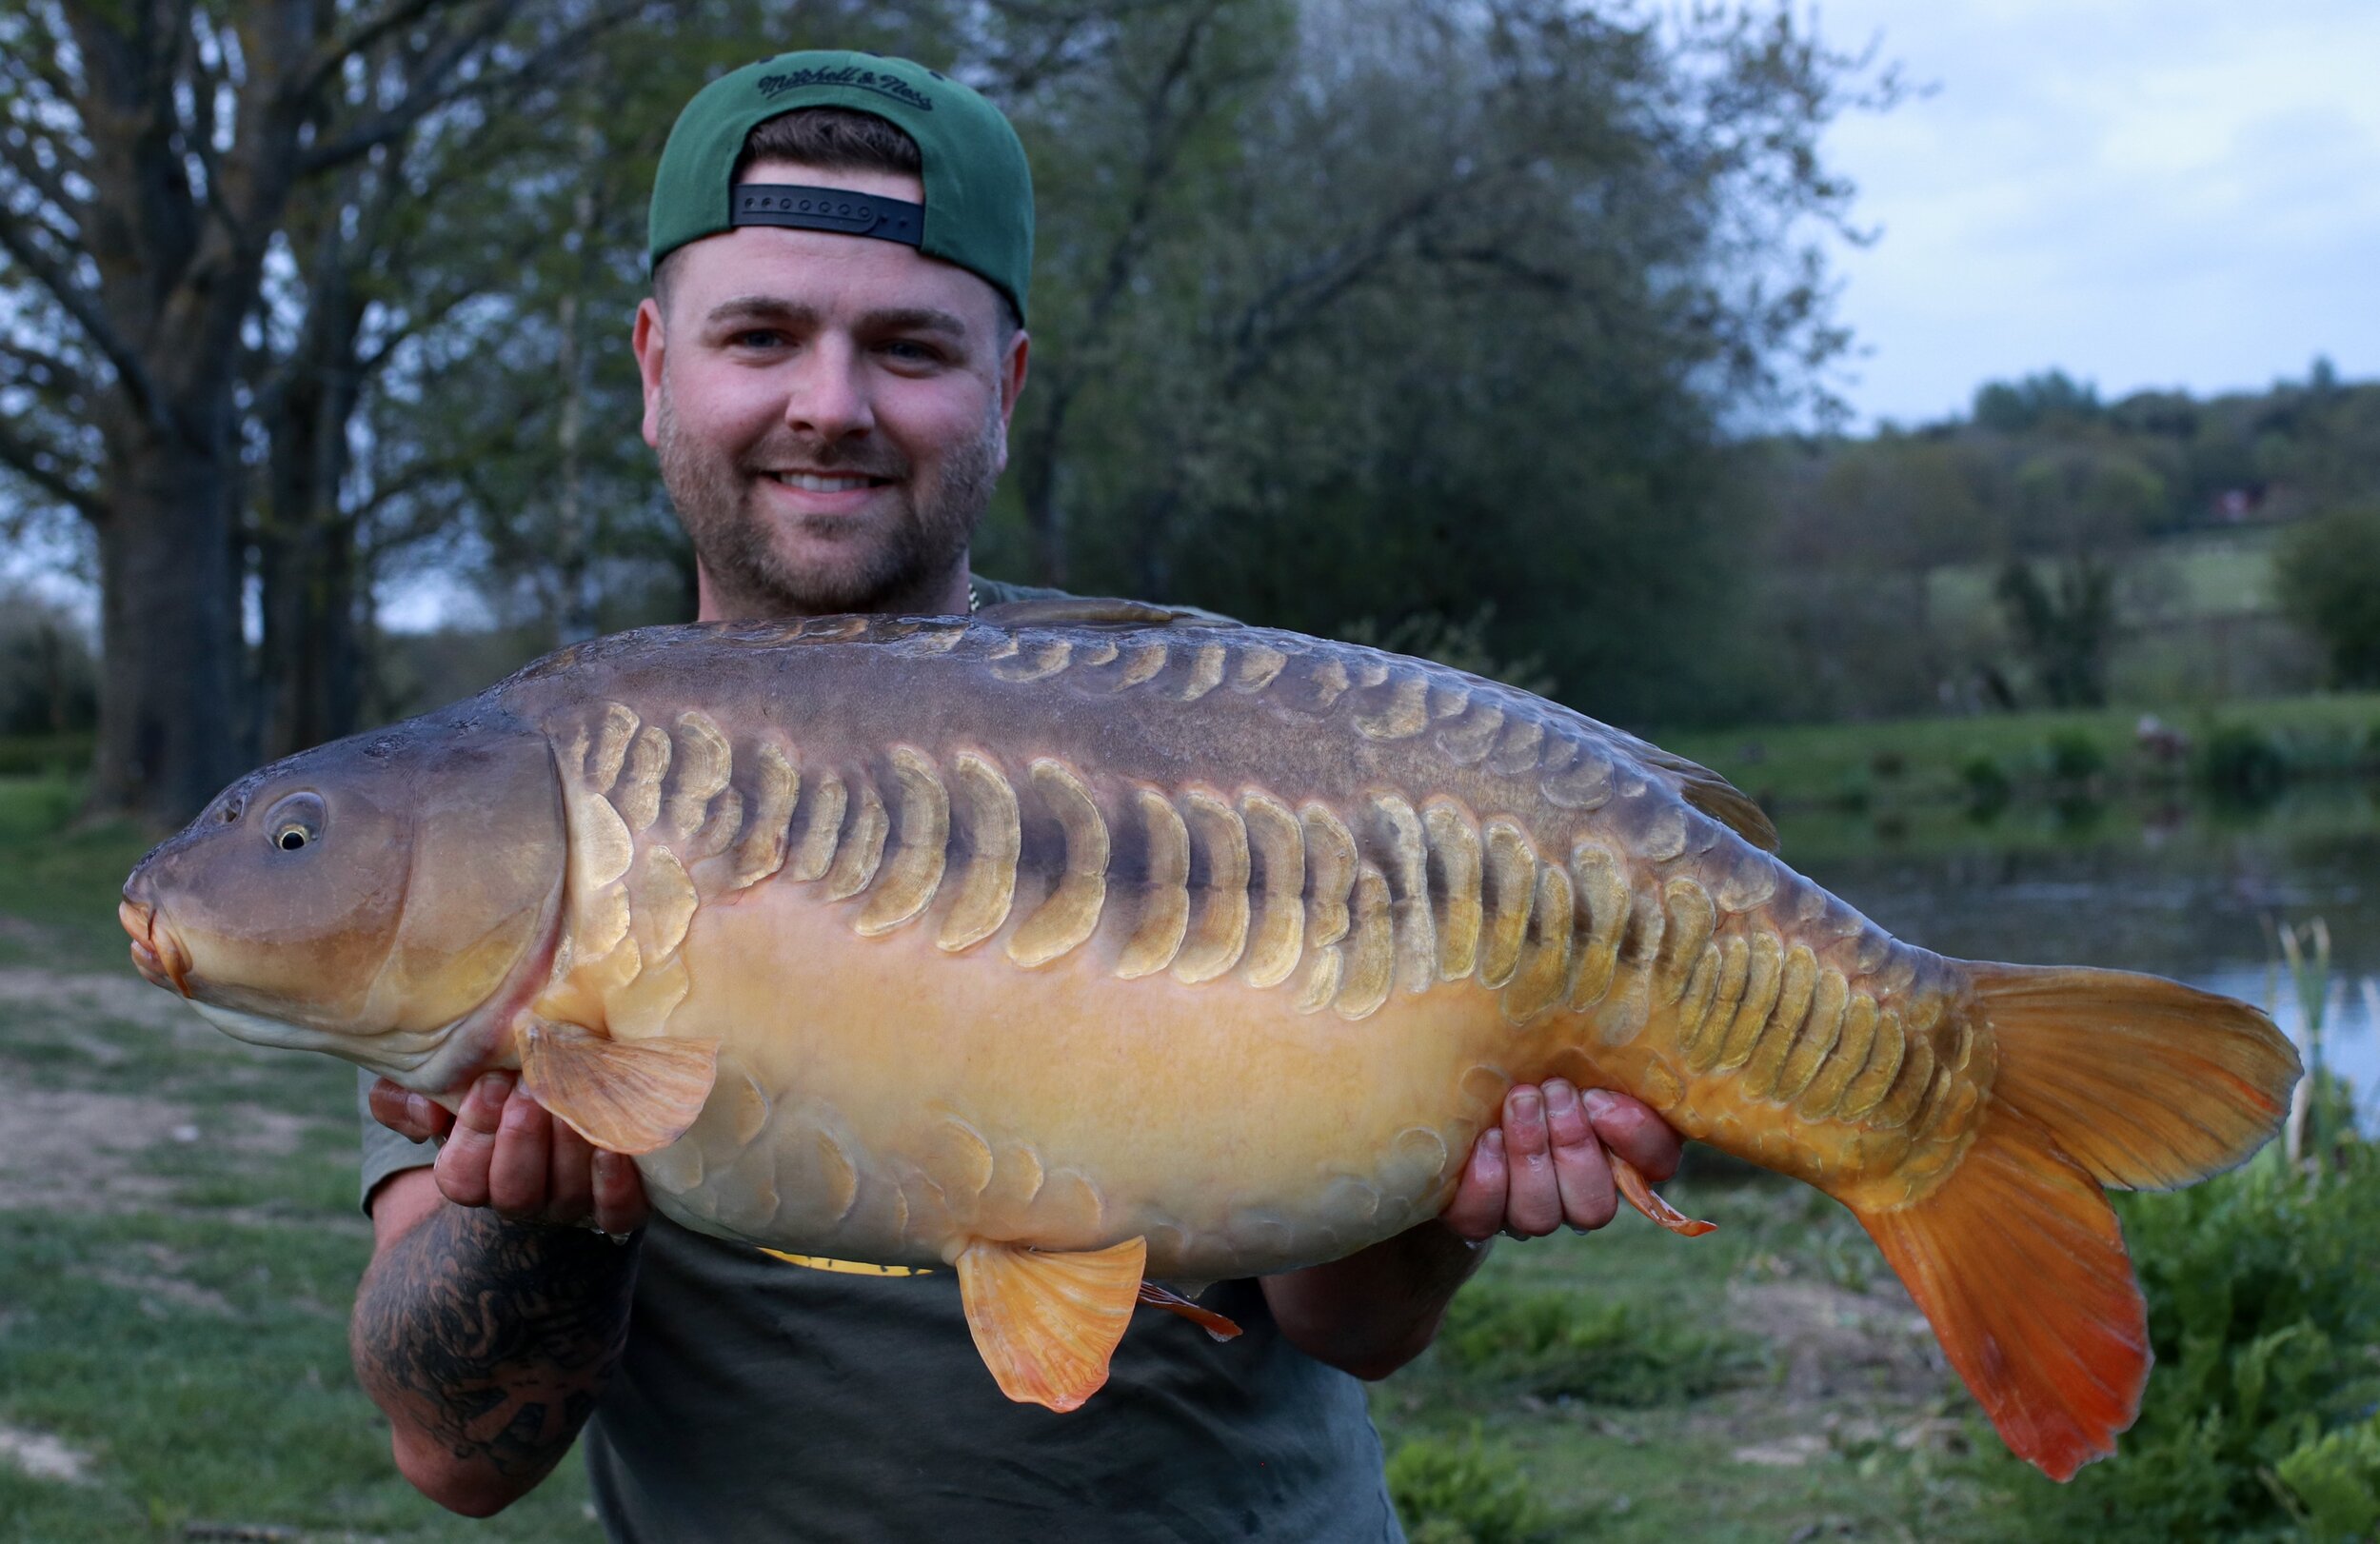 A cracking big mirror from a shallow lake